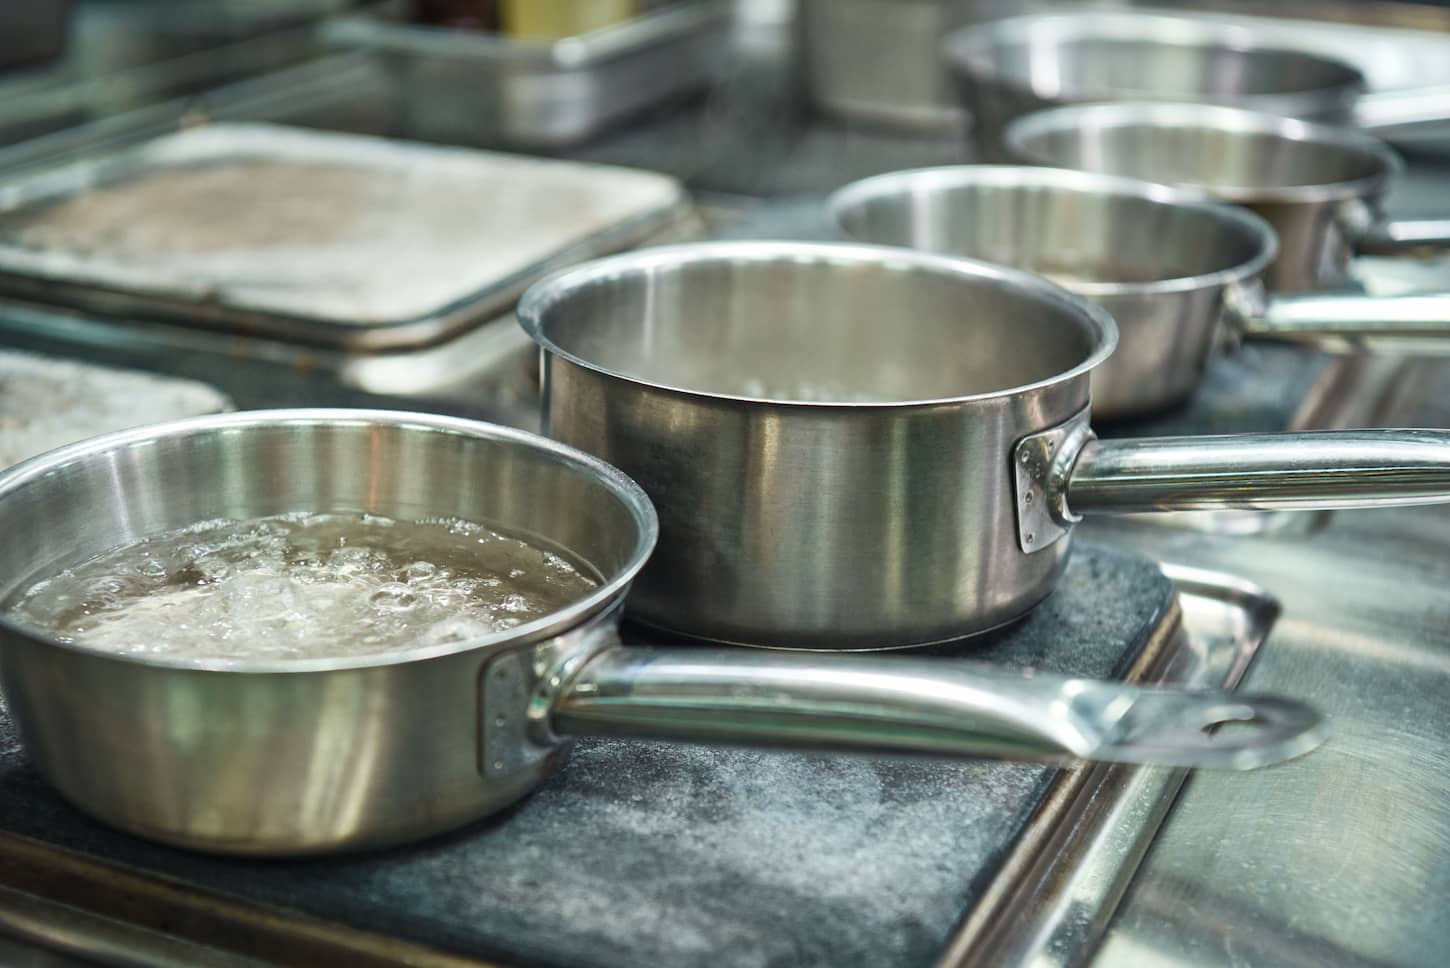 An image of boiling water in a metal pan for pasta cooking.